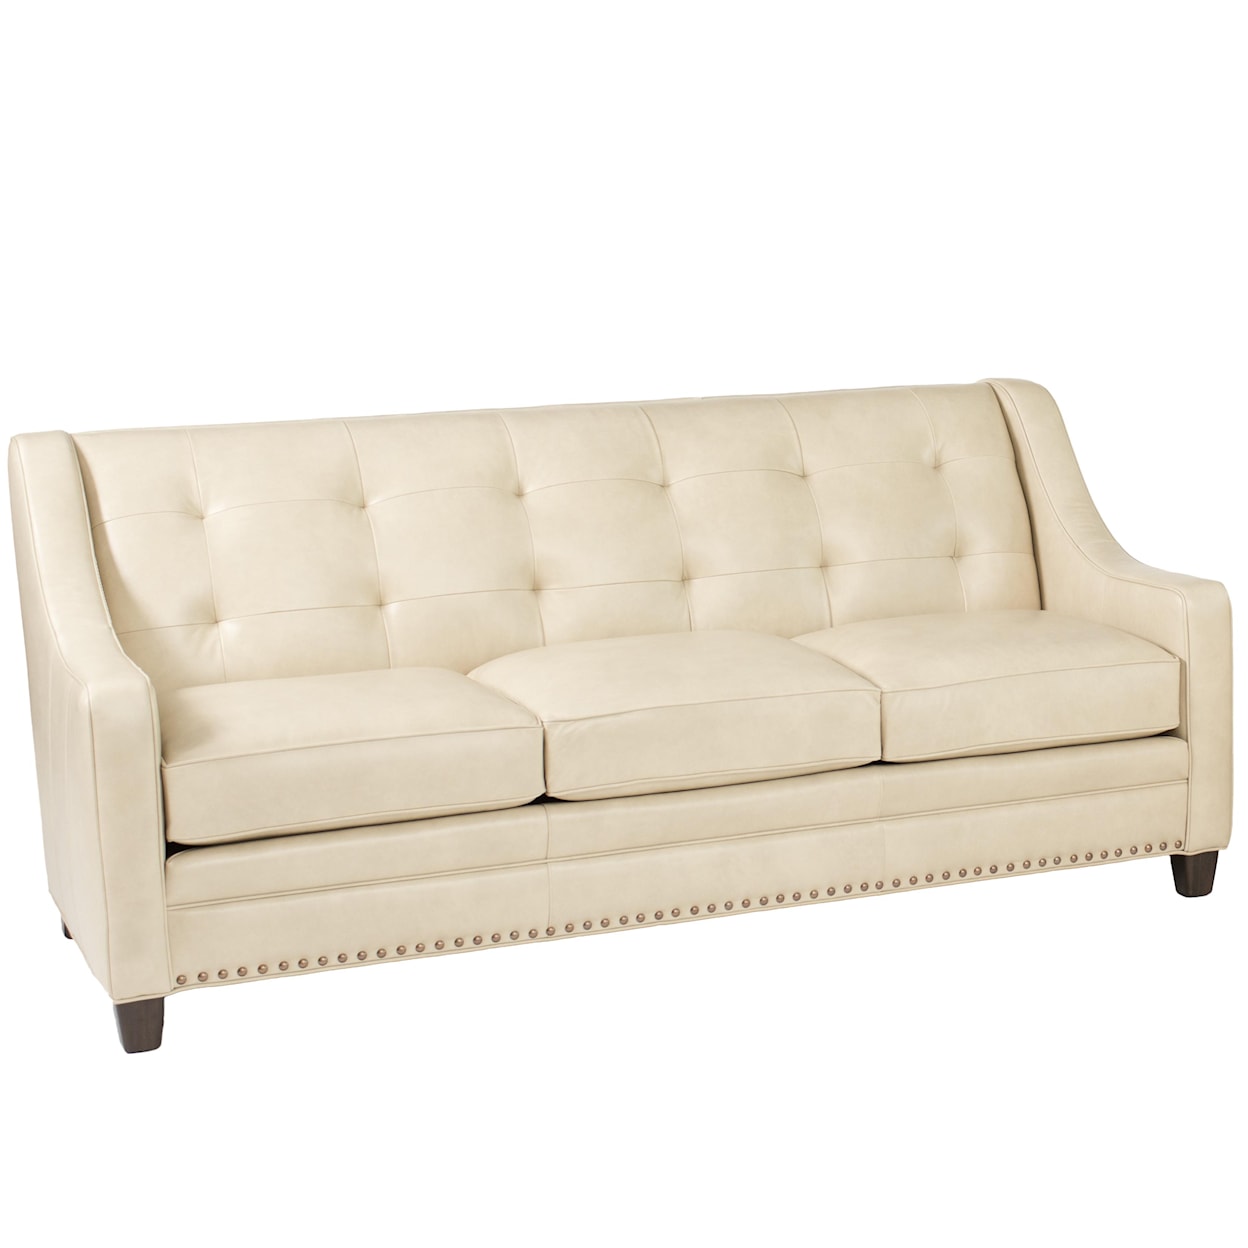 Smith Brothers 203 Transitional Sofa